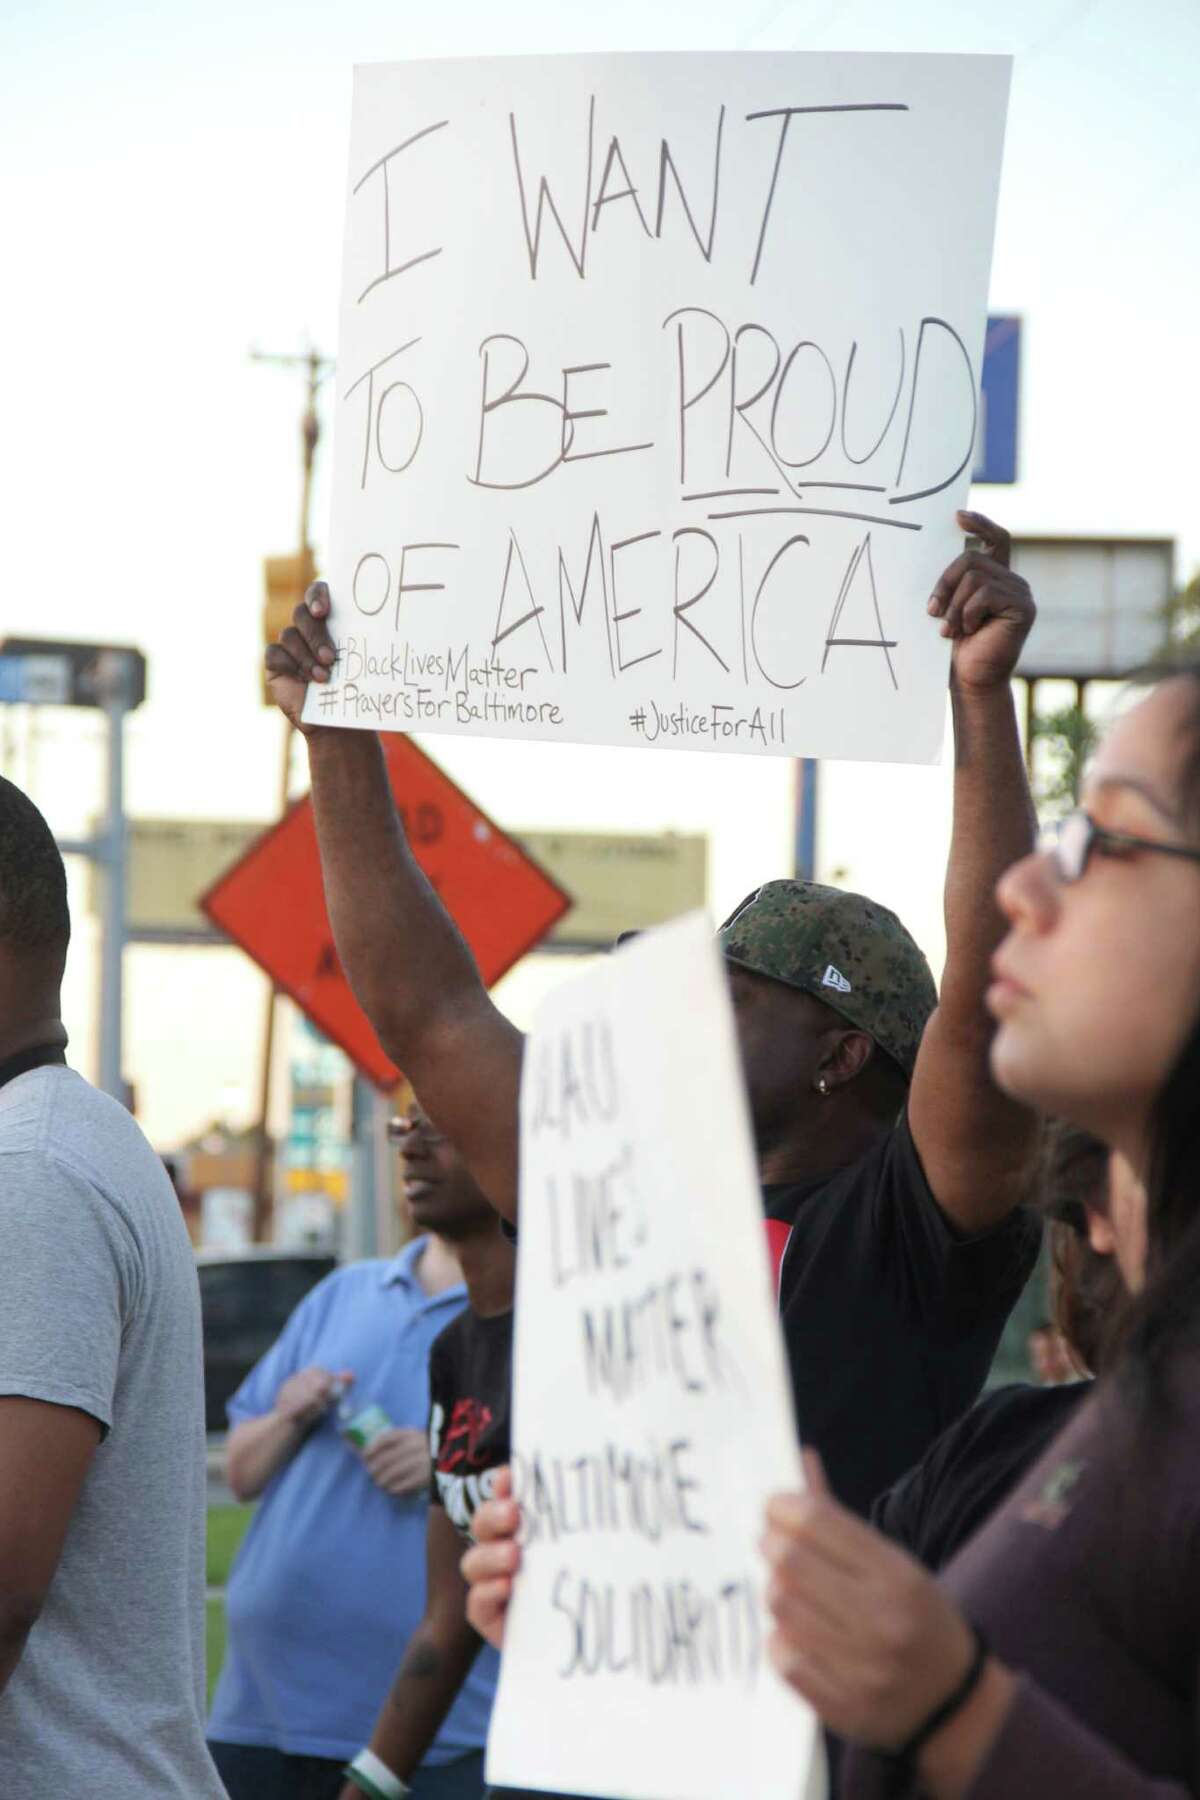 Protesters in San Antonio took to Perrin Beitel and Loop 410 on Wednesday evening to show support and solidarity in the wake of the death of Freddie Gray, who reportedly died of a spinal injury while in Baltimore police custody.